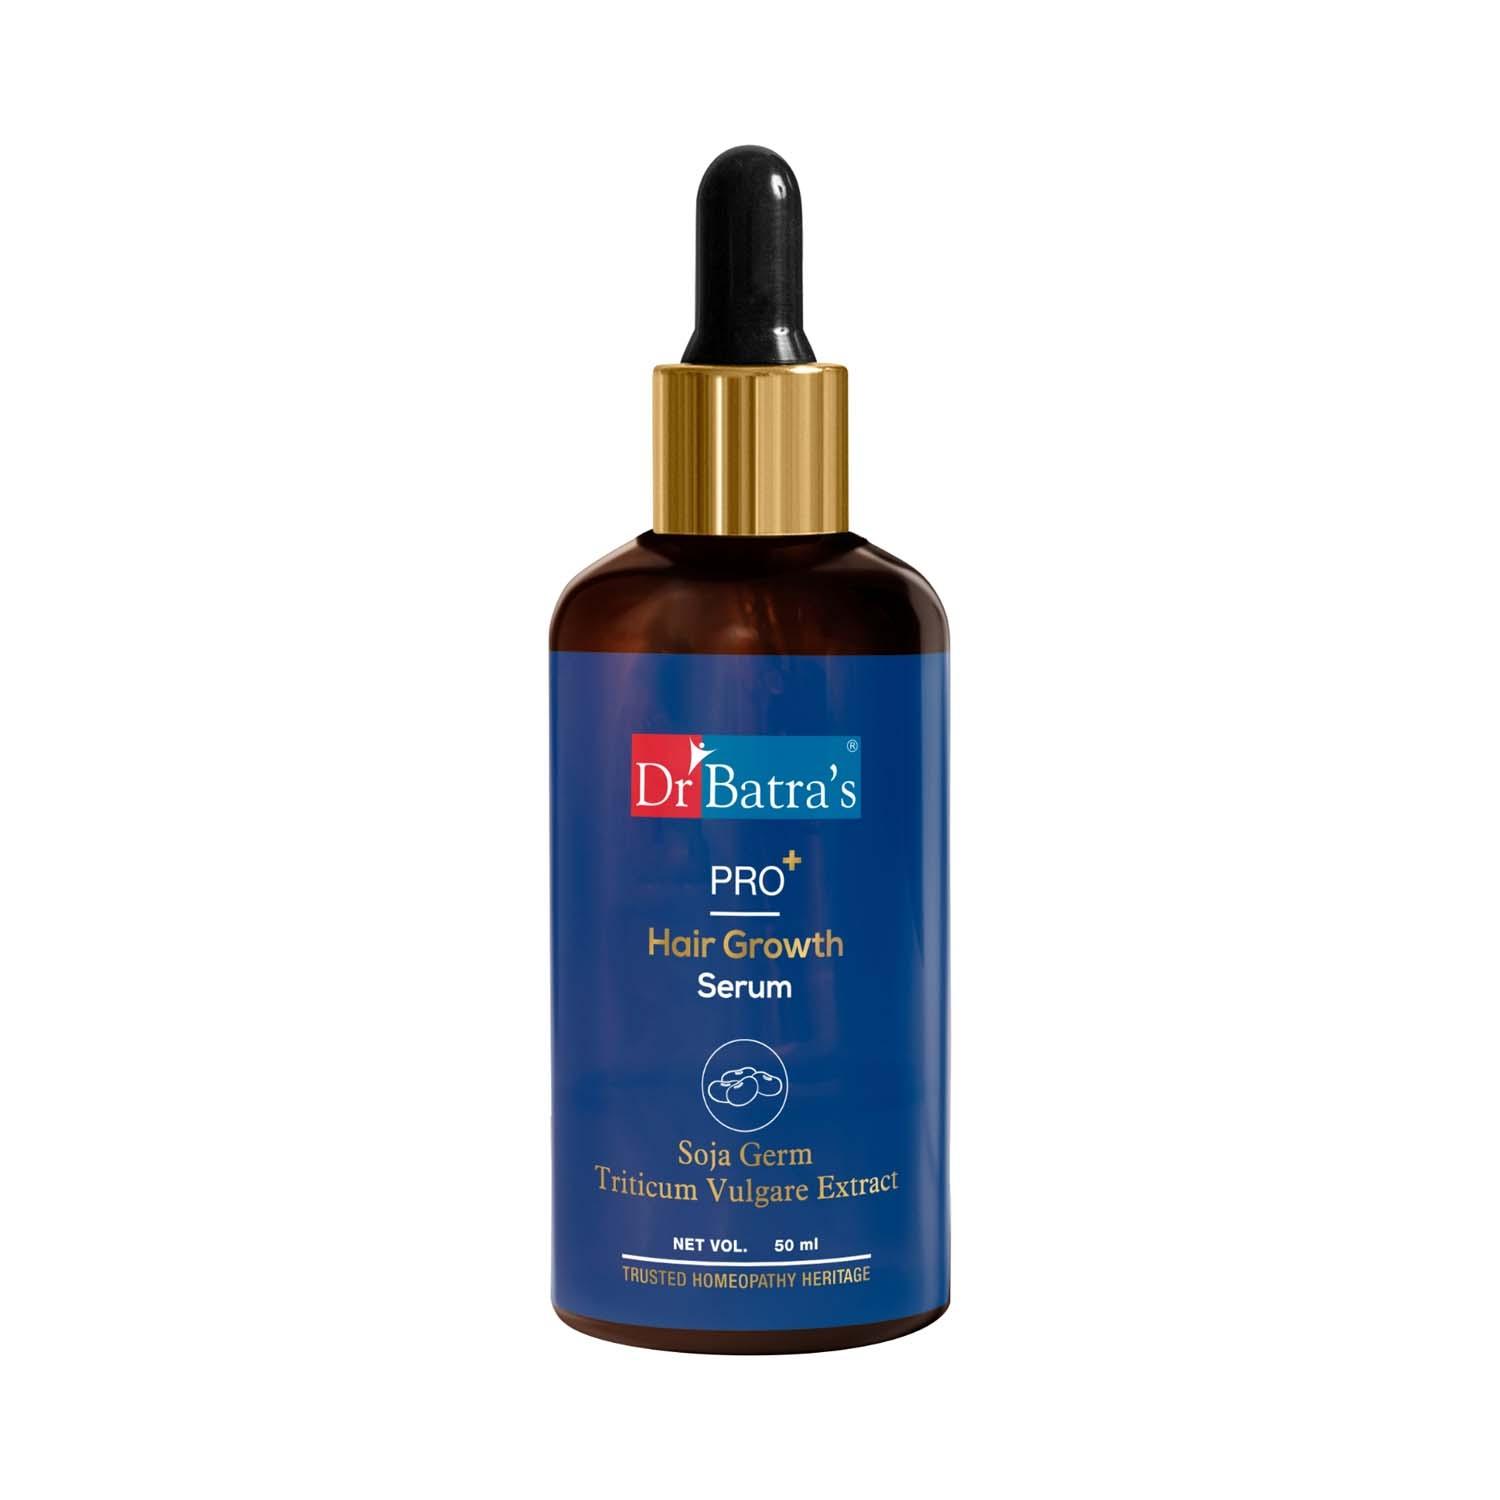 dr-batra's-pro-hair-growth-with-triticum-vulgare-extract-serum-(50ml)